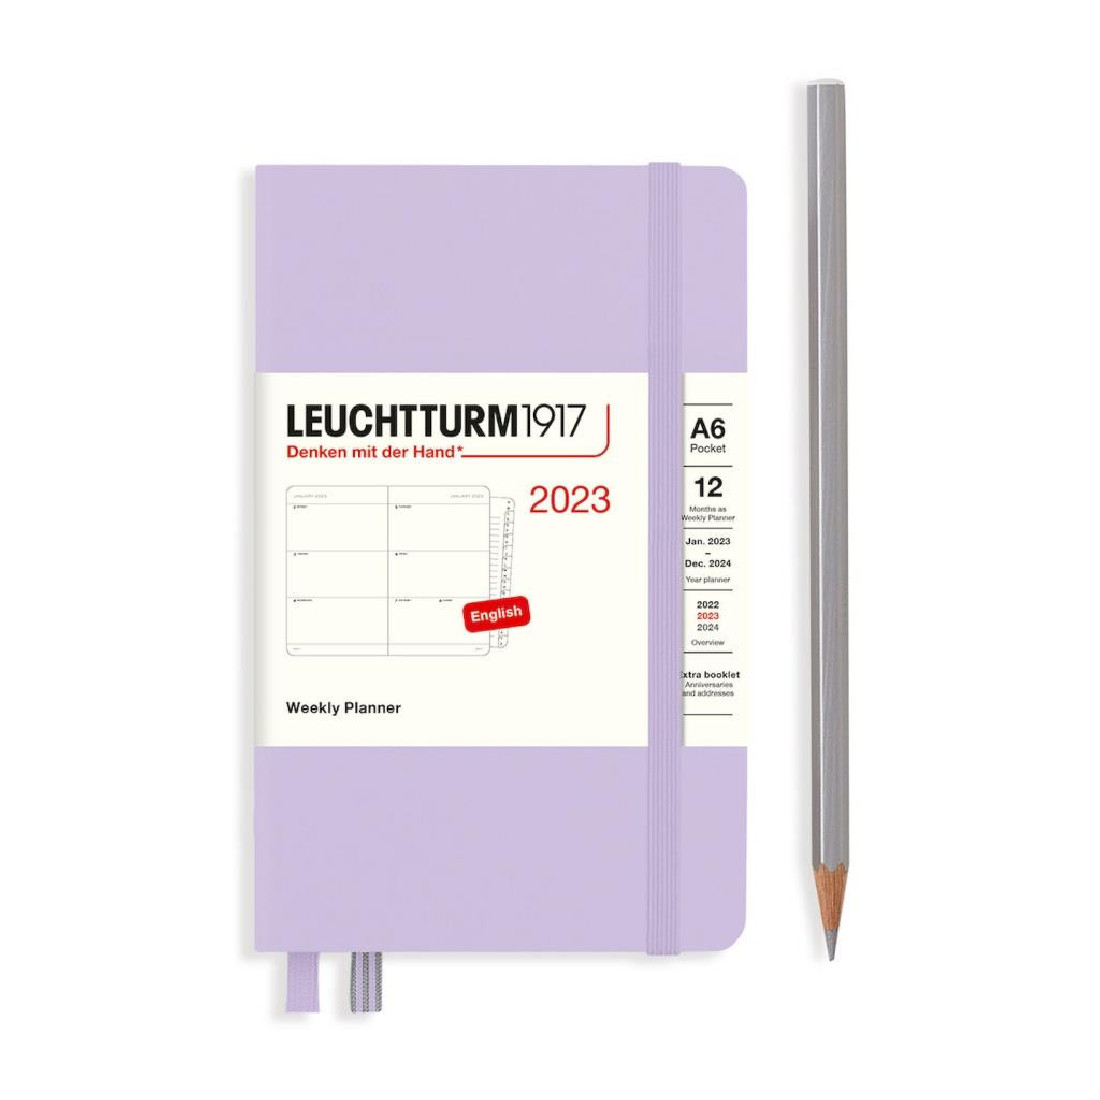 Leuchtturm 1917 Weeky planner 2023 Lilac pocket A6 hard cover